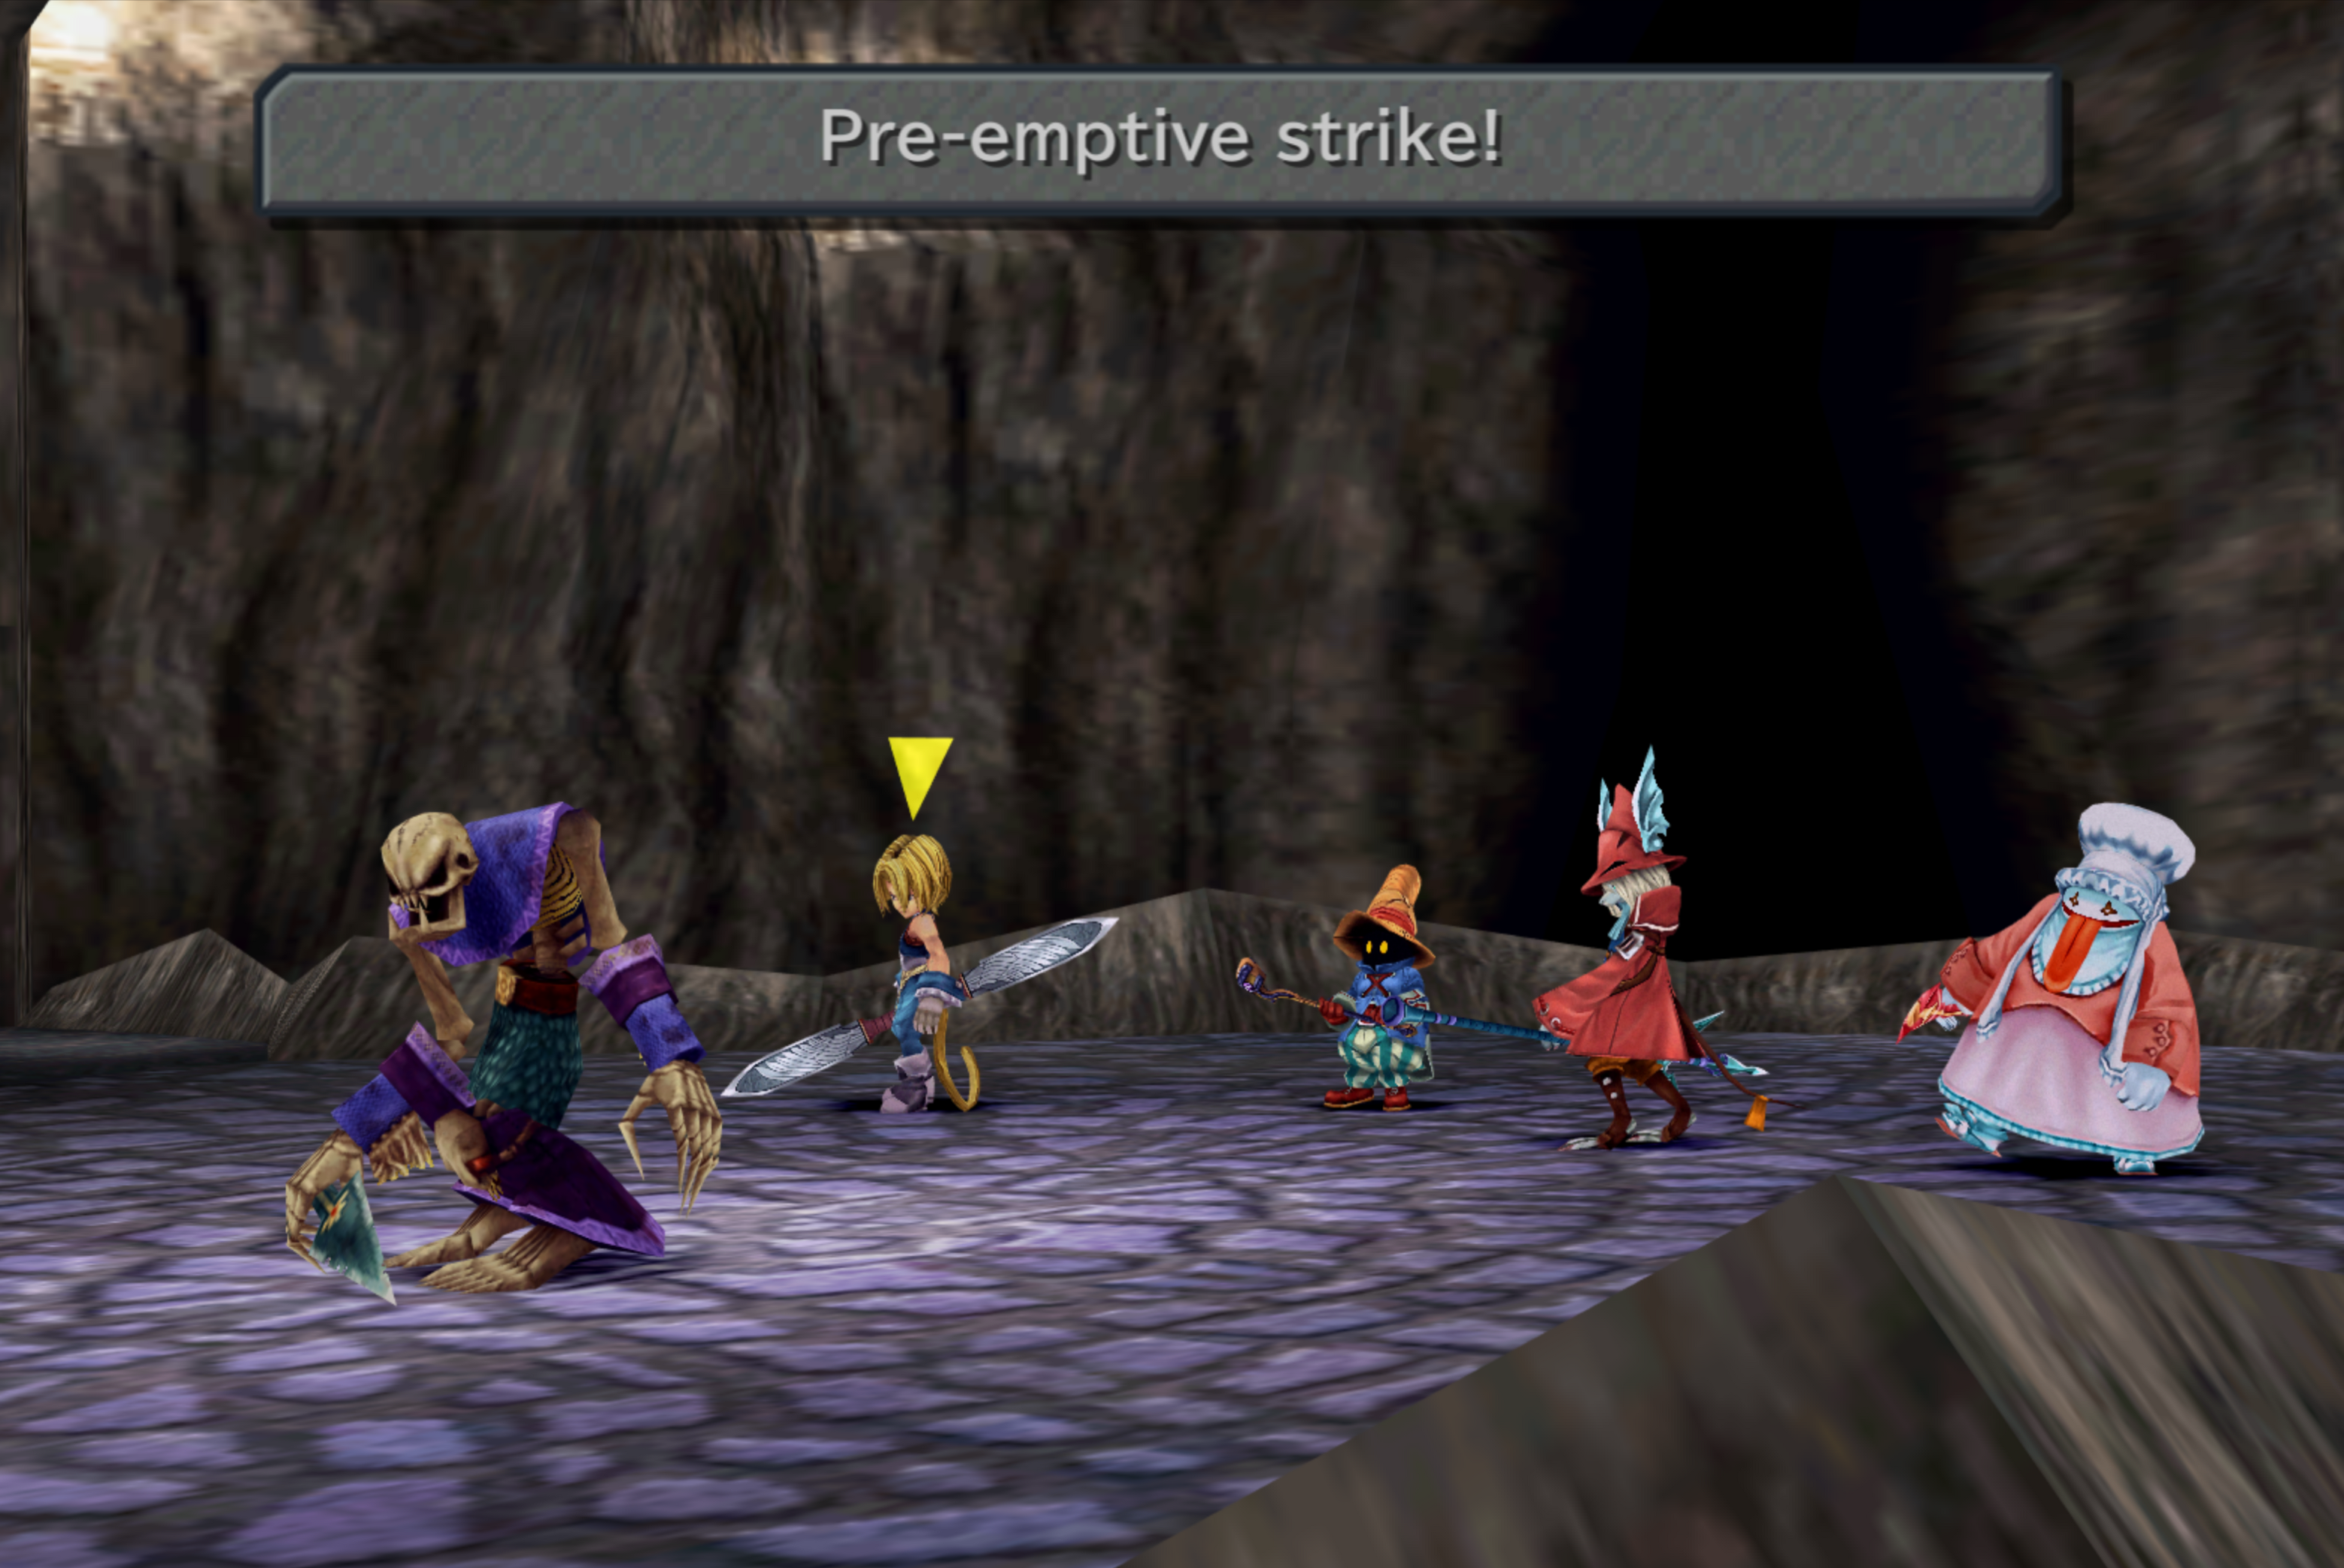 Final Fantasy 9 Is Getting An Animated TV Series - Game Informer